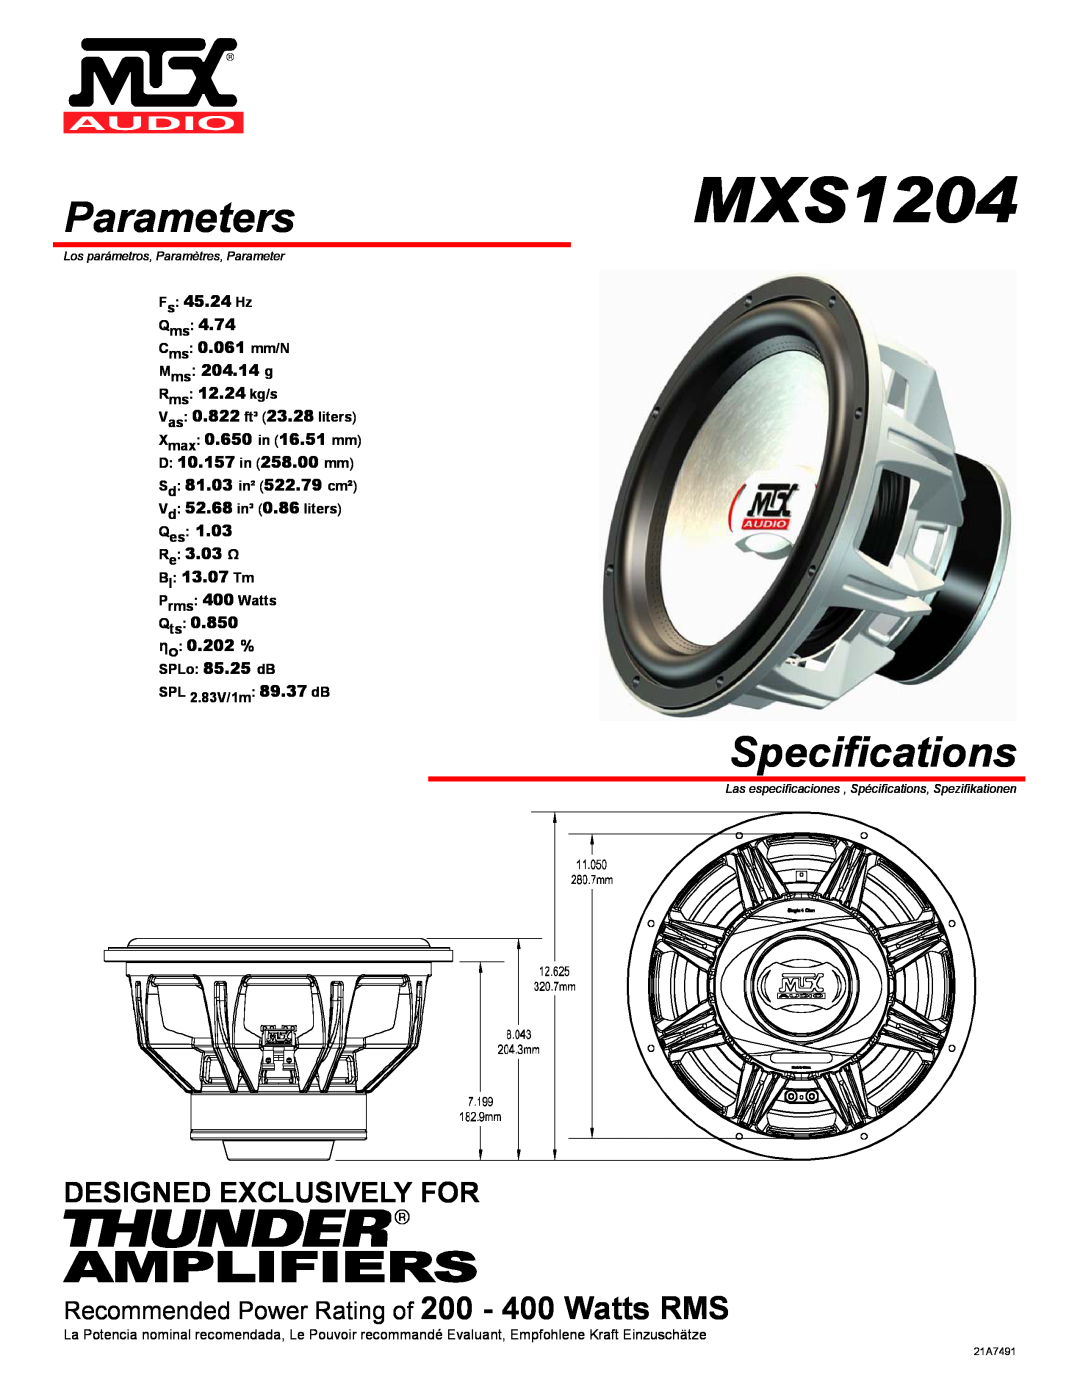 MTX Audio MXS1204 specifications Parameters, Specifications, Amplifiers, Designed Exclusively For, Fs 45.24 Hz Qms 